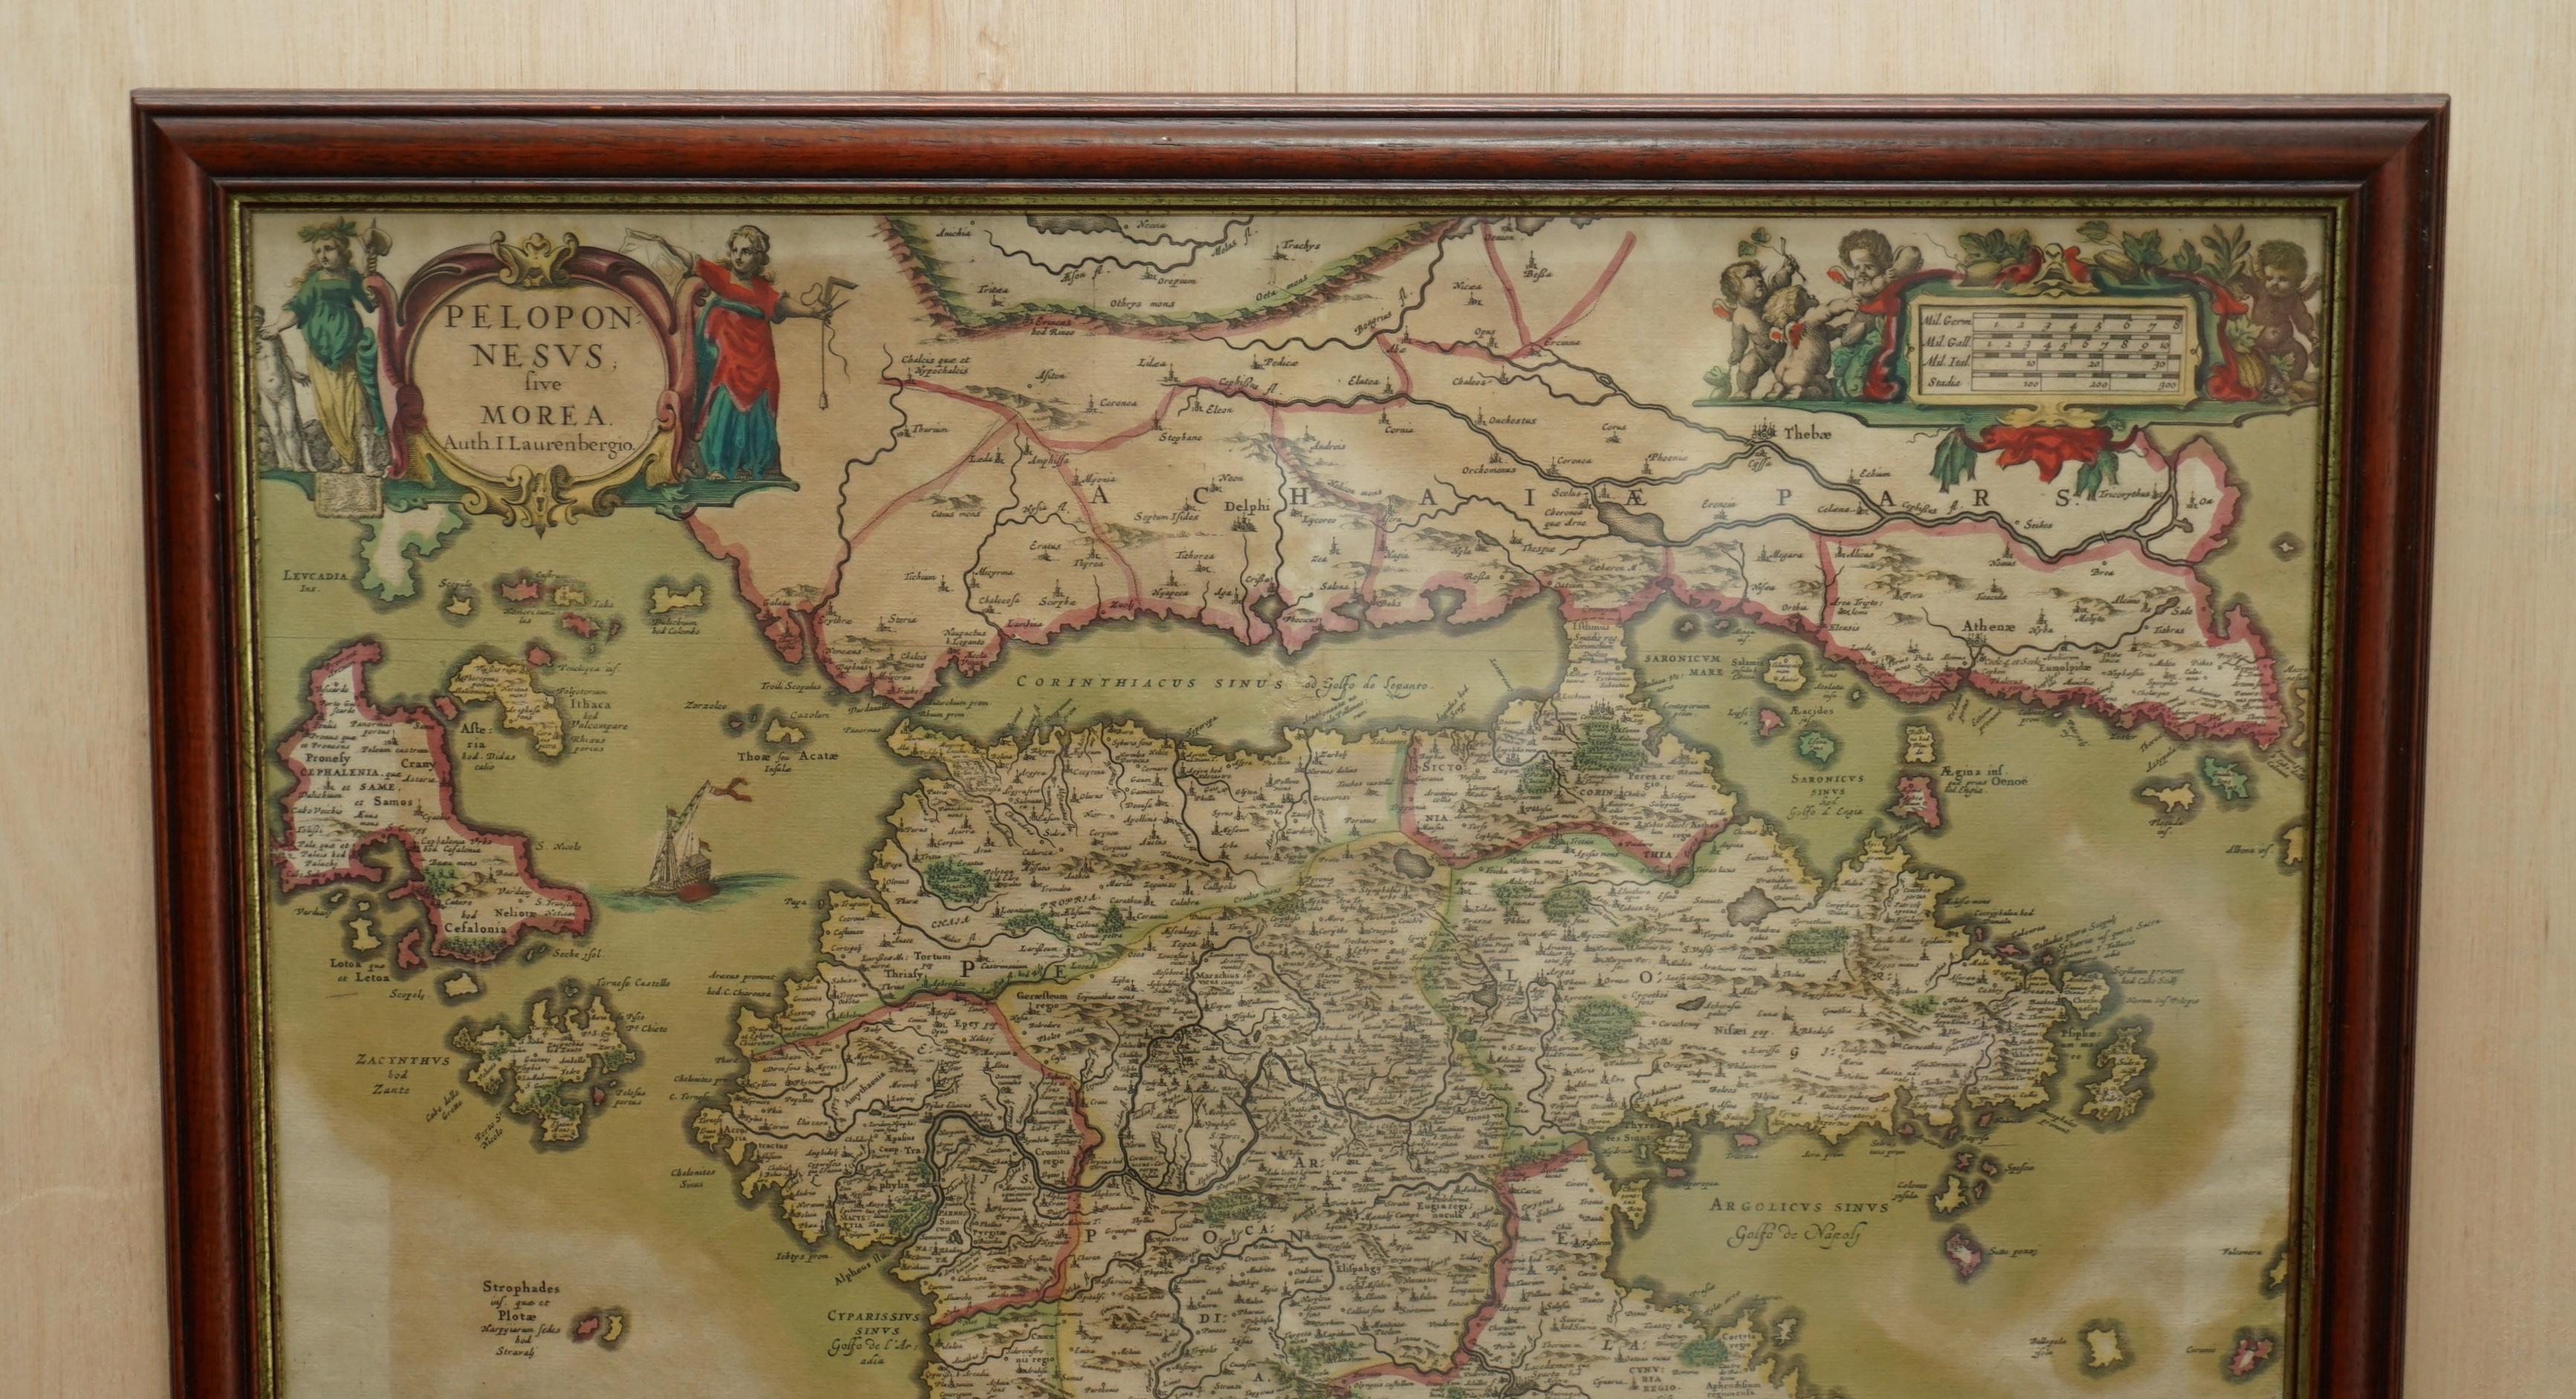 We are delighted to offer for sale this Jan Jansson Date: 1660 (published) Amsterdam map of Greece.

This is an authentic antique map of Peloponnese or the Morea peninsula by Jan Jansson. The map was published in Jansson's 